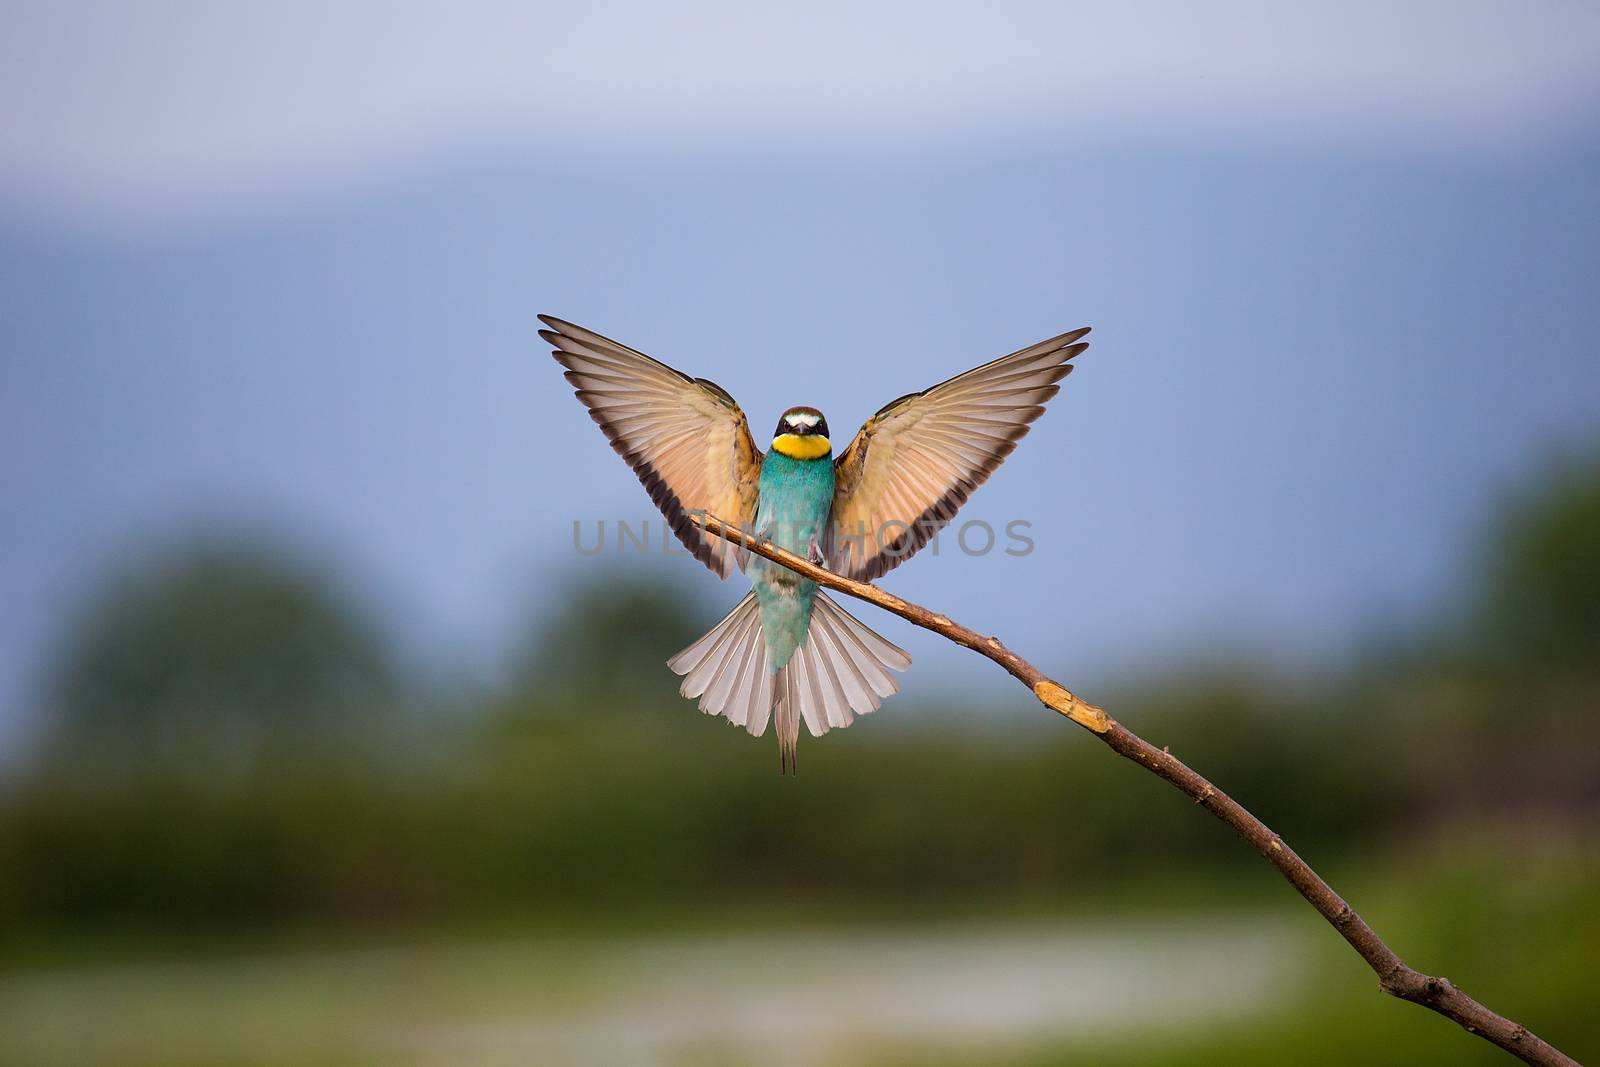 European Bee-eater (Merops apiaster) flying on brunch - tropical colours bird, Isola della Cona, Monfalcone, Italy, Europe